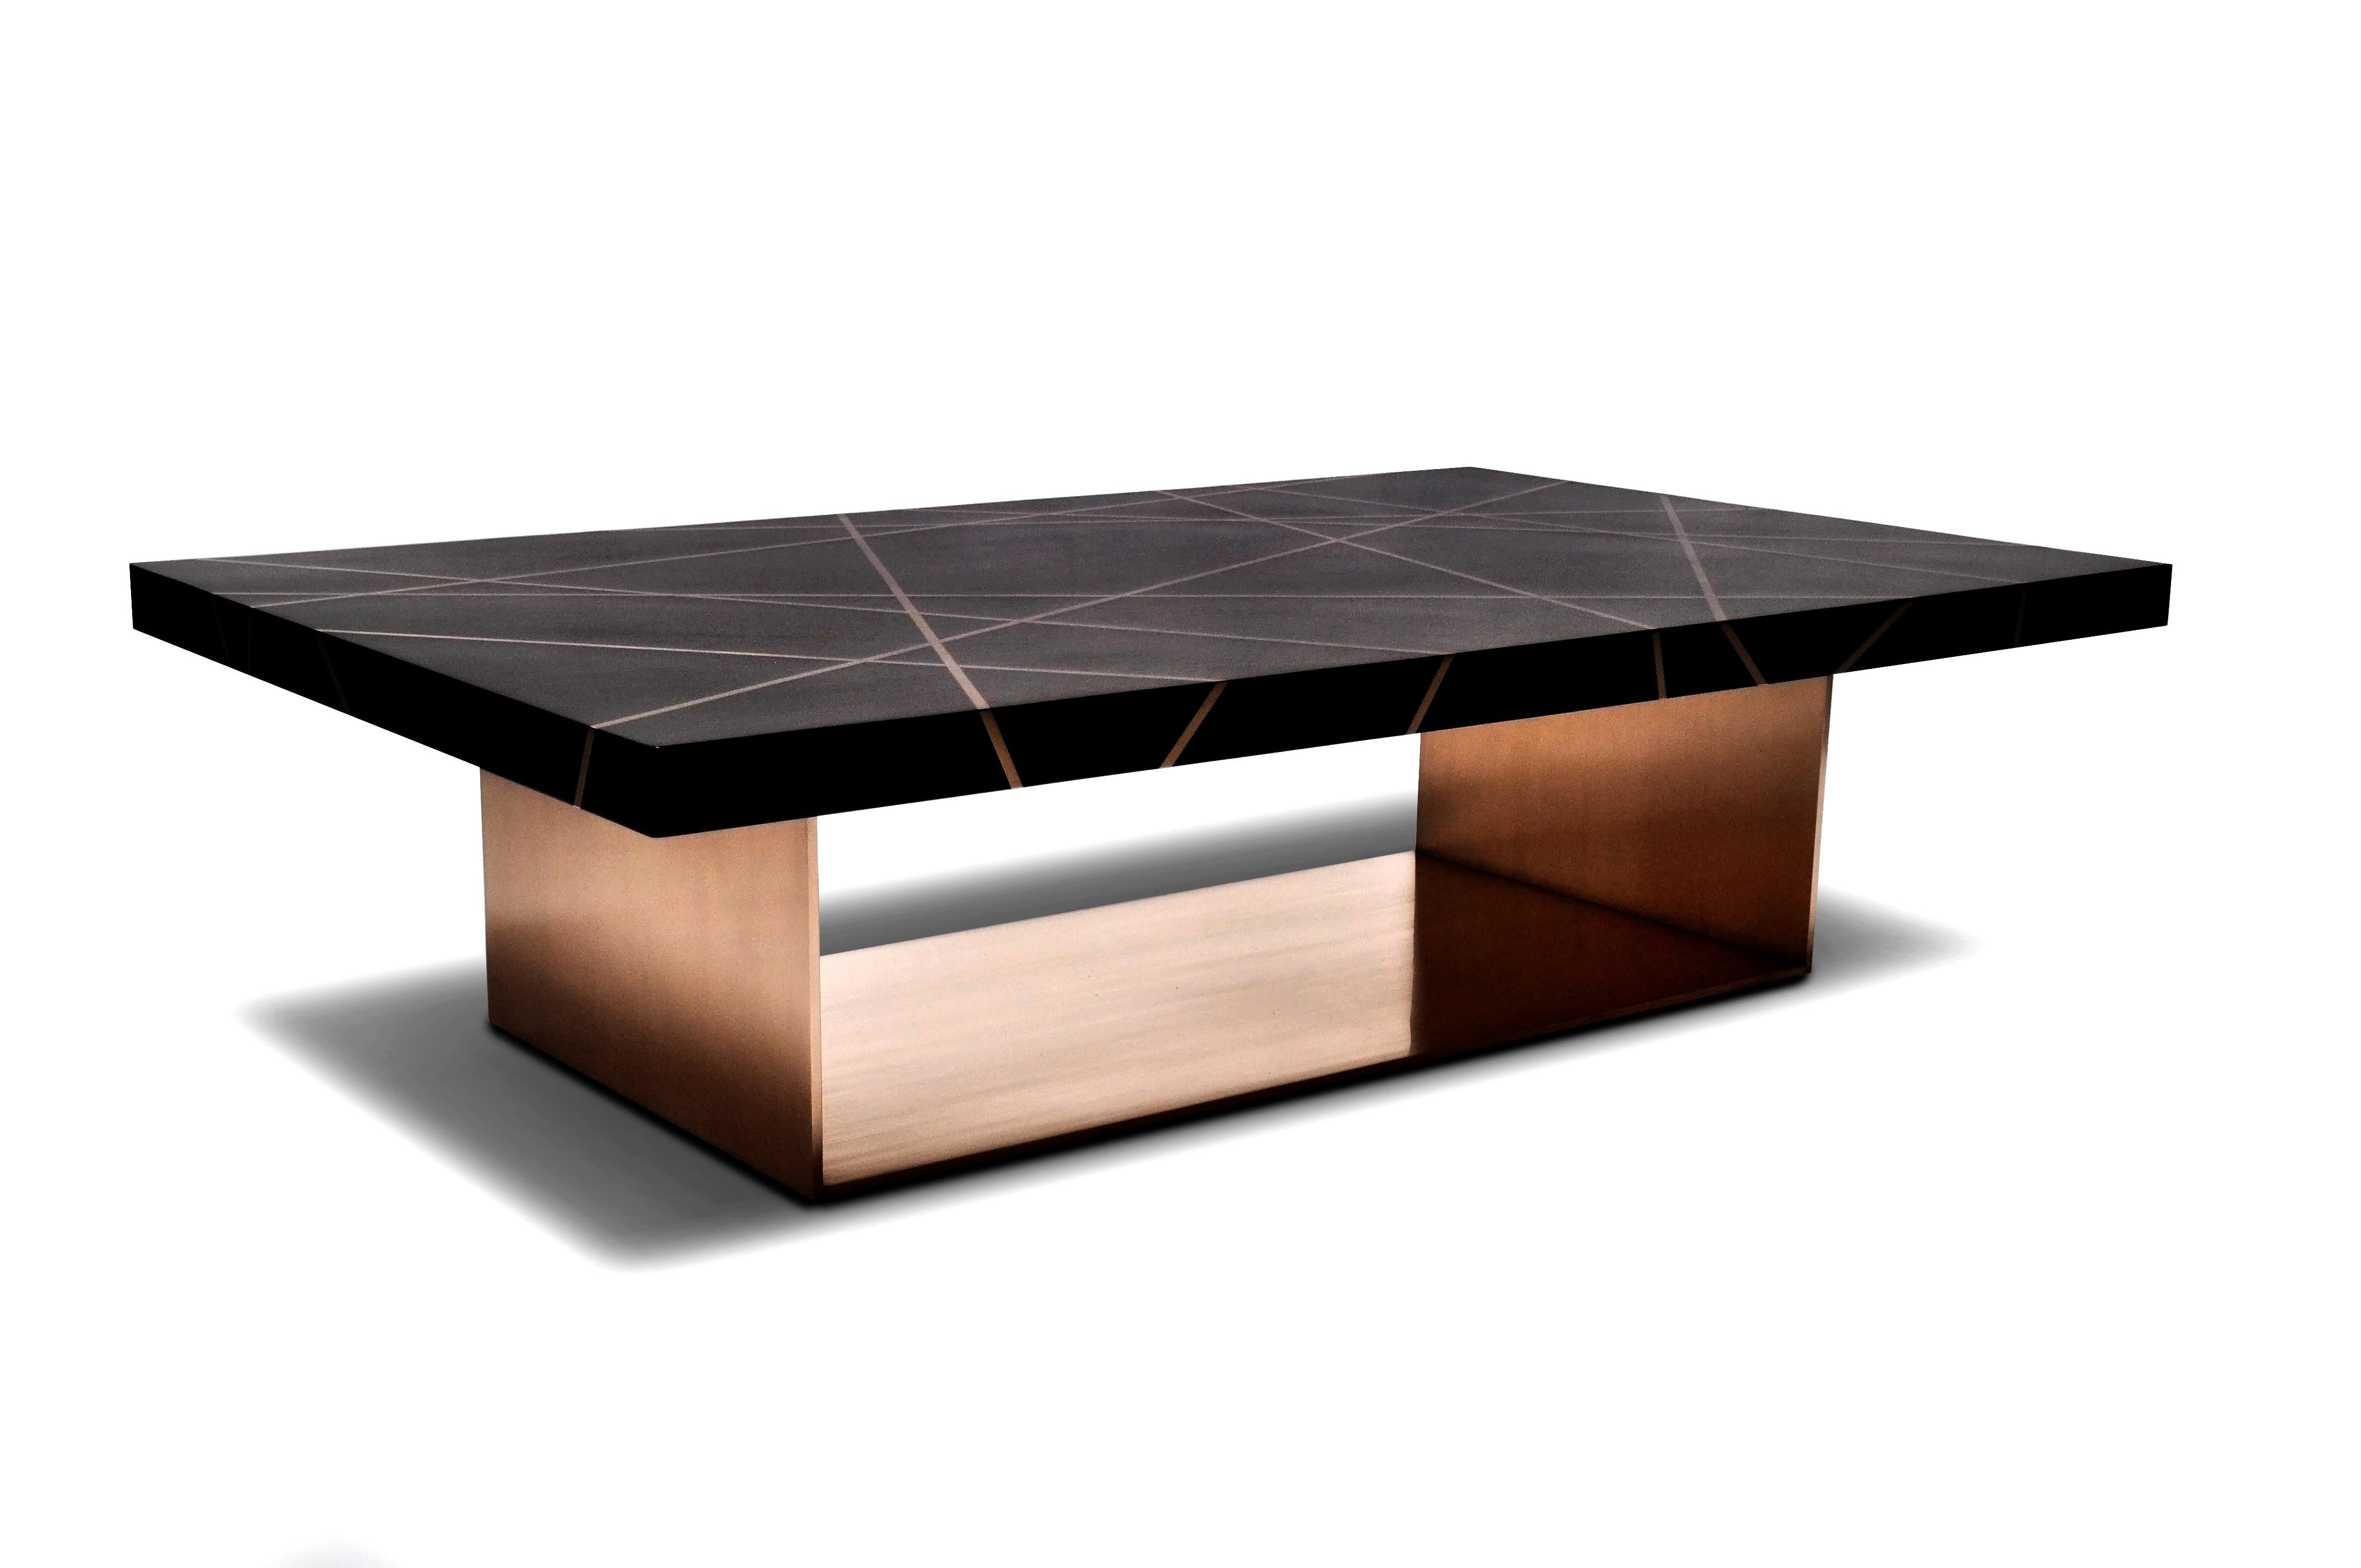 This Ray rectangular cocktail table is designed using custom dyed figured walnut with bronze inlay in a ray pattern with a solid bronze base. The figured walnut top is a custom finish in a flat polished sheen with a custom radius edge detail. The